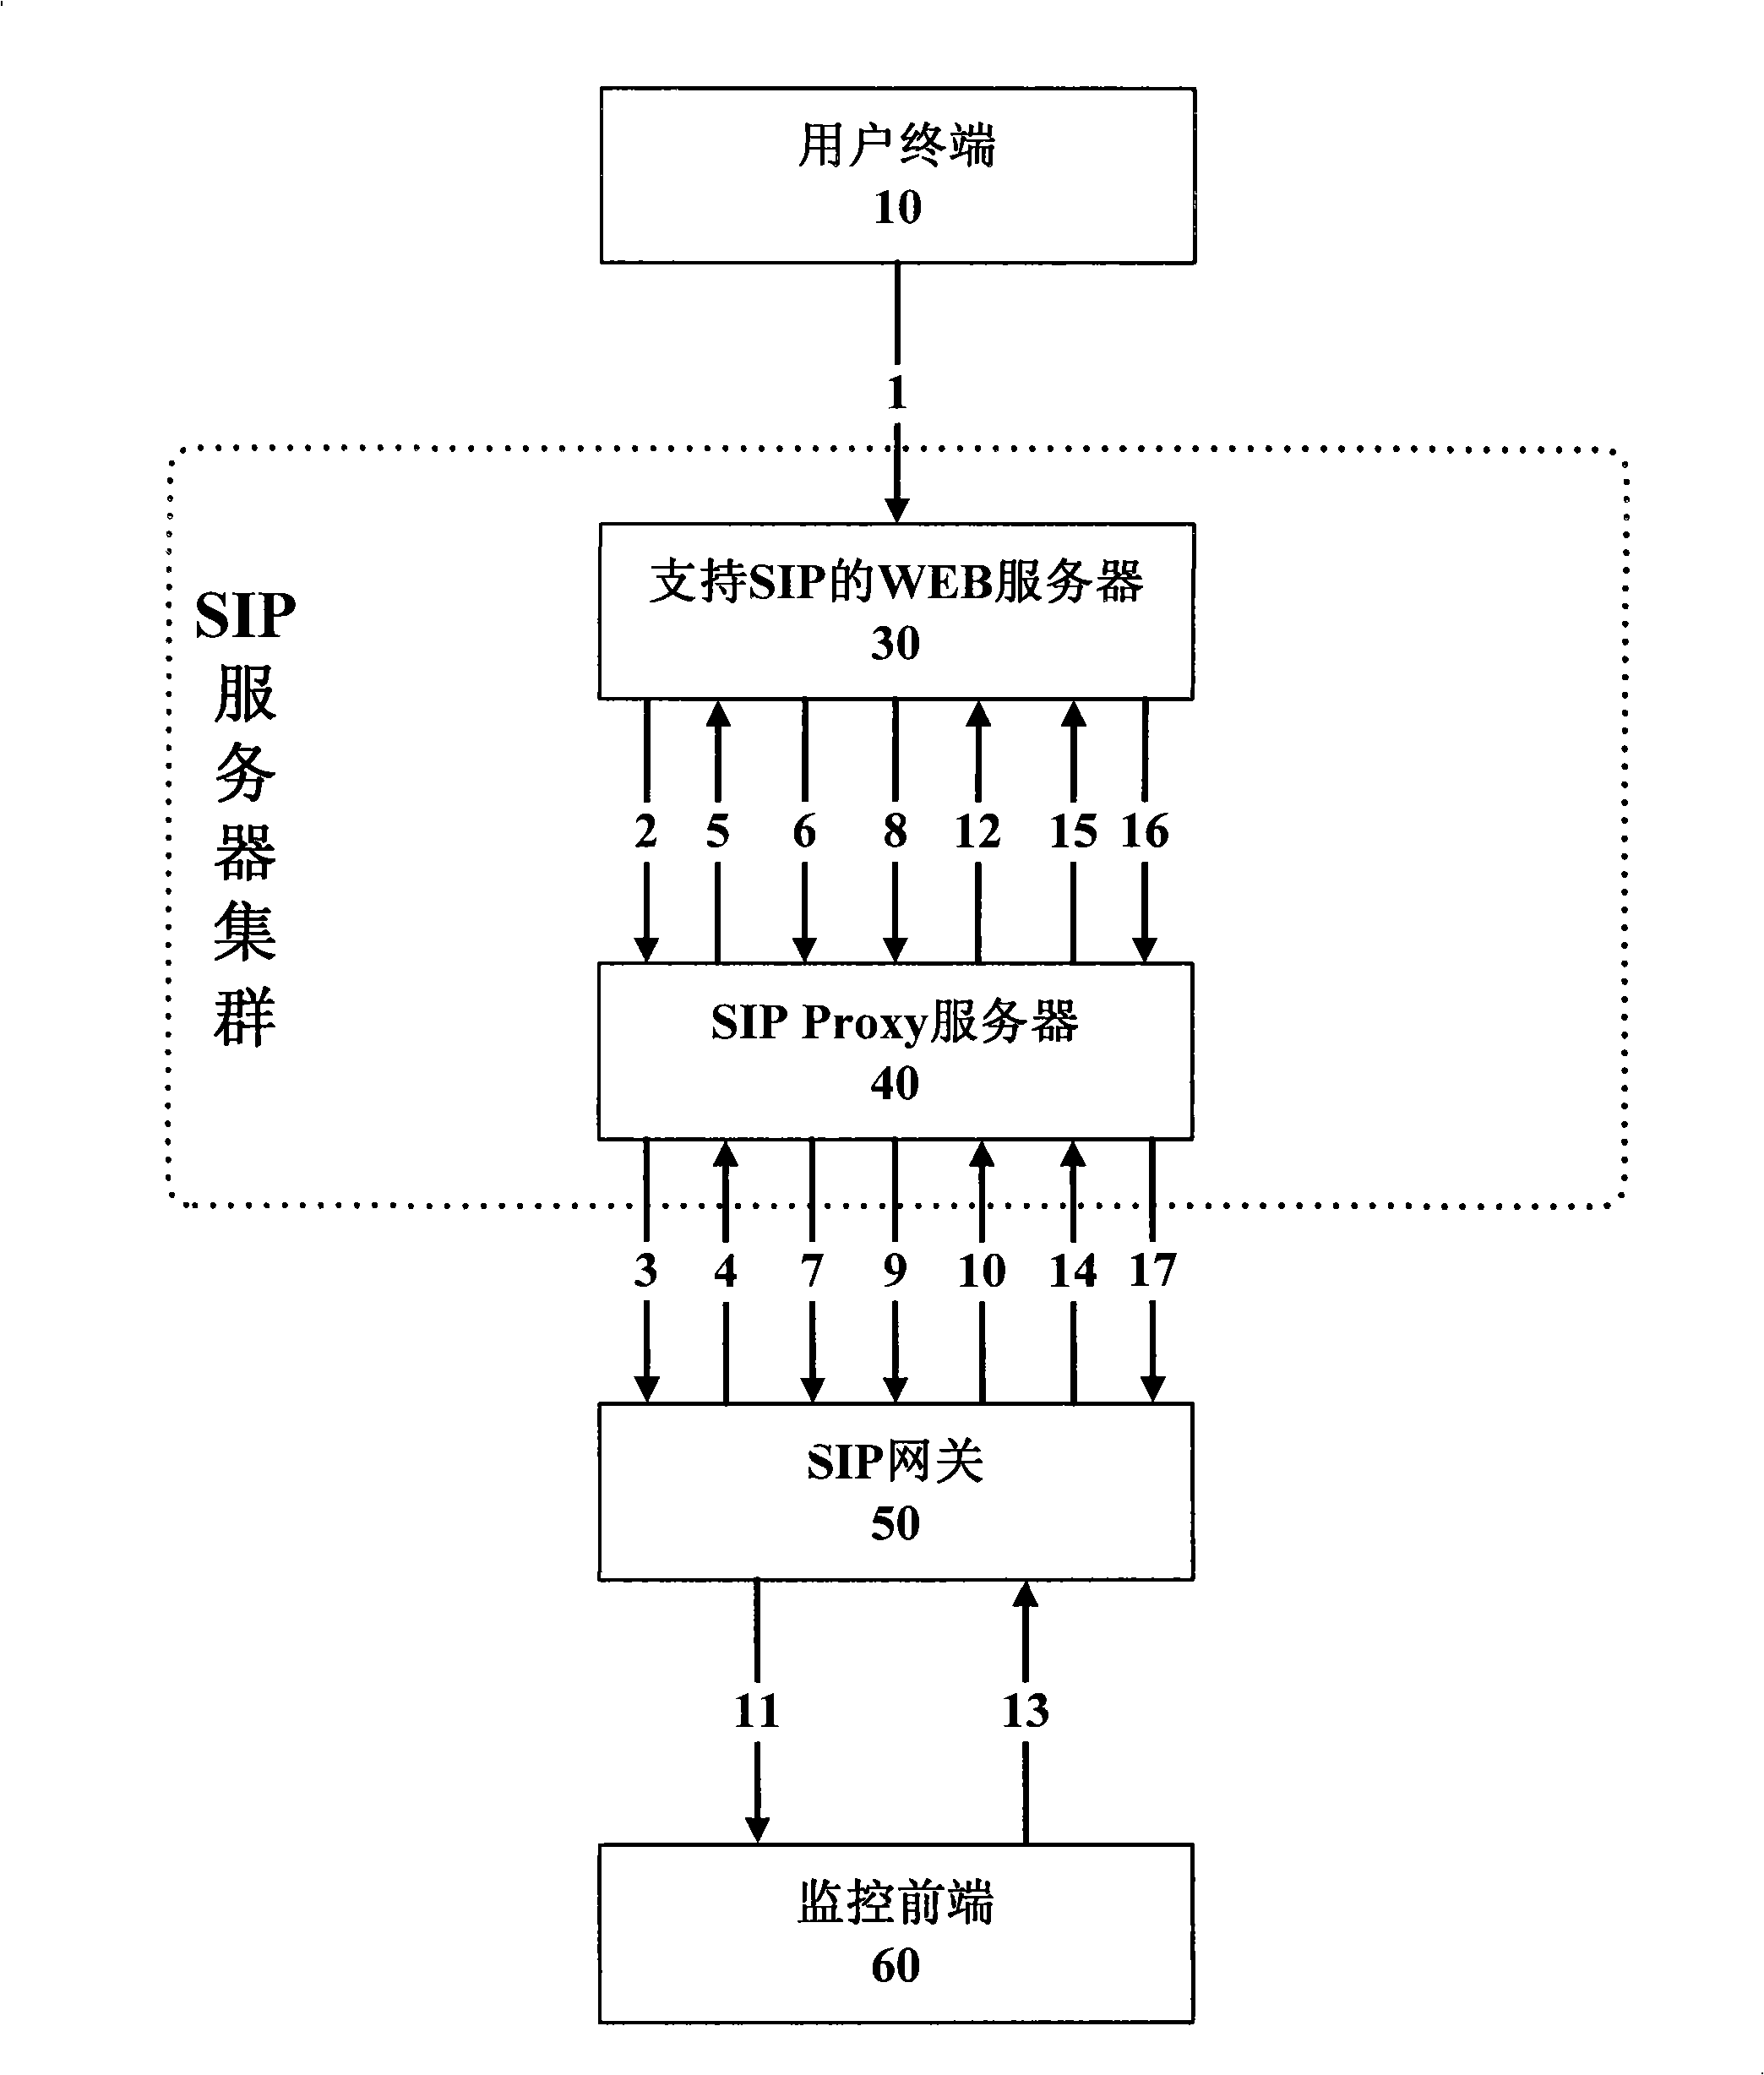 Method for video monitoring platform to operate and control front-end device based on SIP server cluster